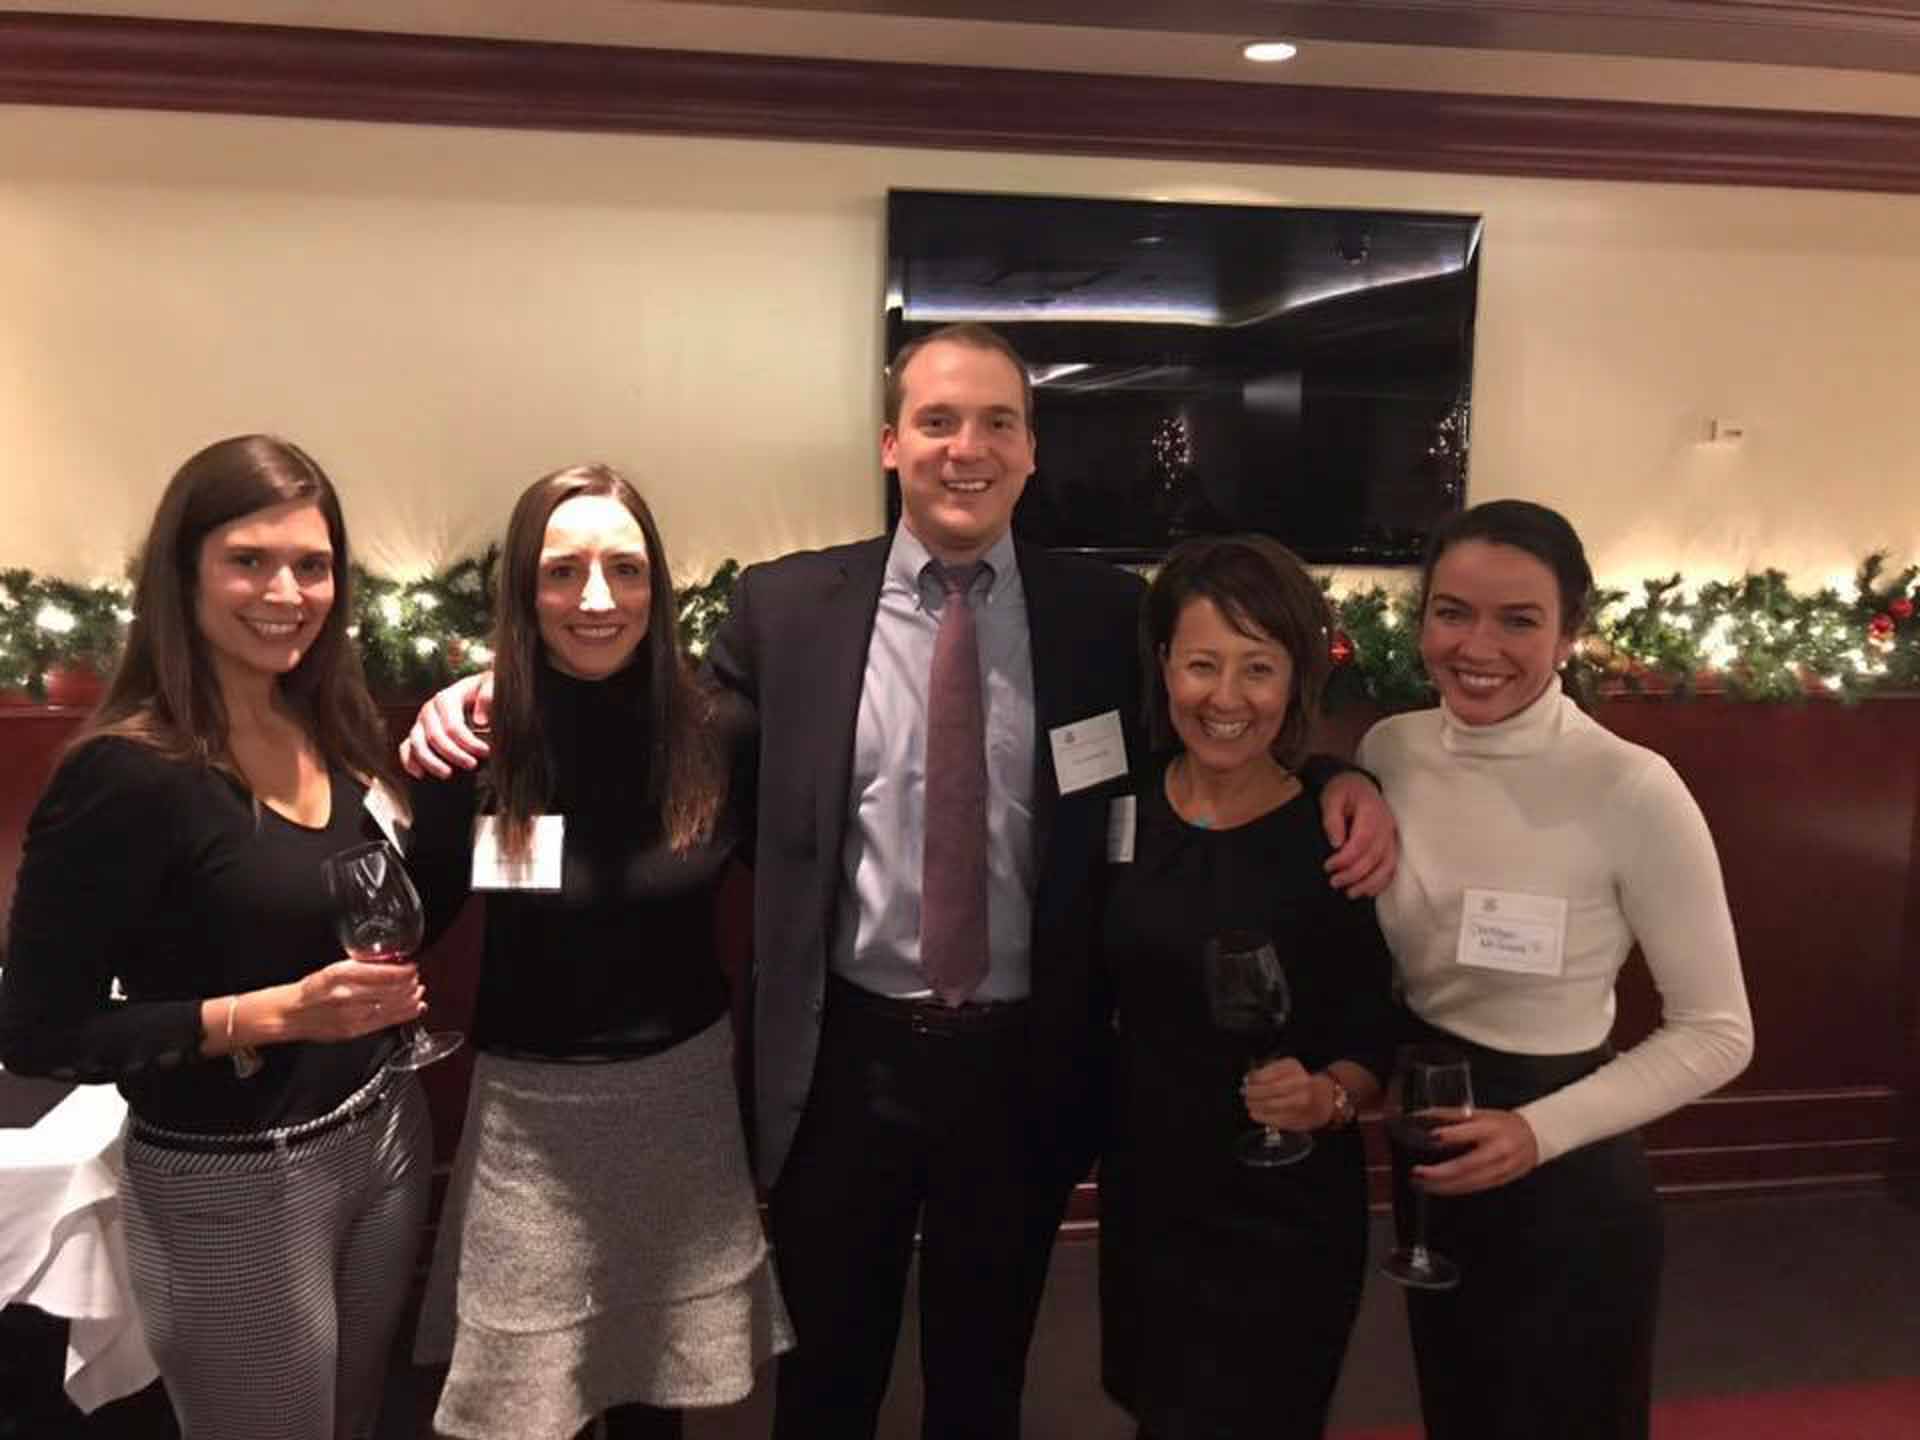 law-association-christmas-social-2019-five-people-smiling